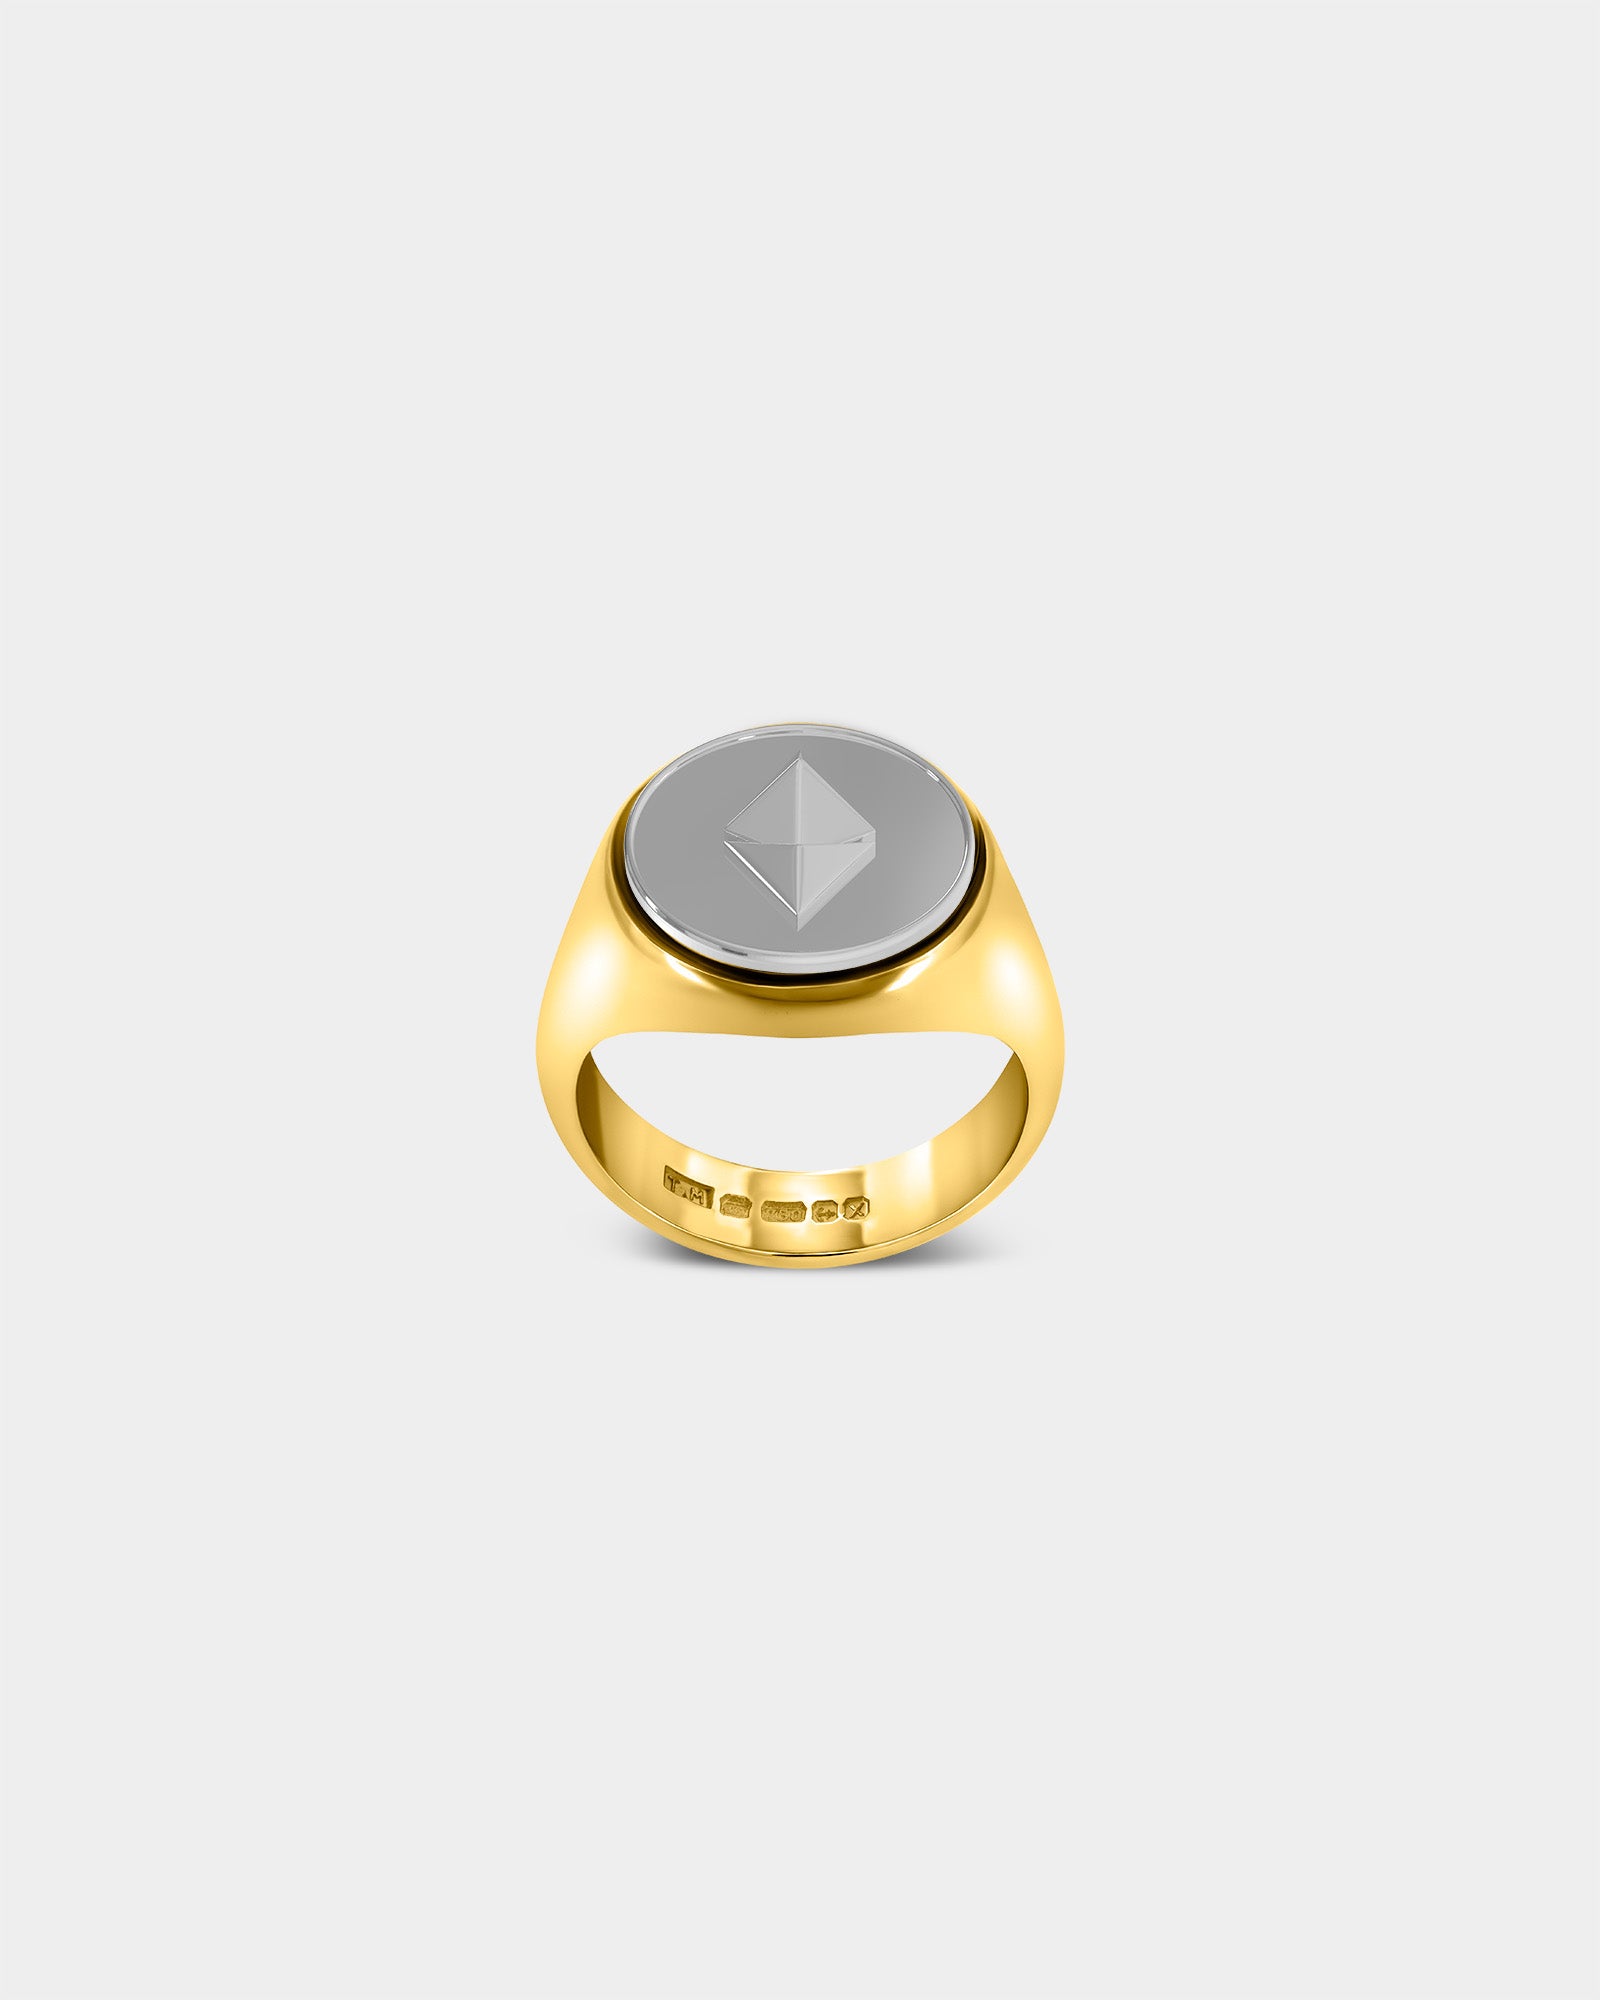 Large Ethereum Crypto Ring in 9k Yellow Gold / Sterling Silver by Wilson Grant